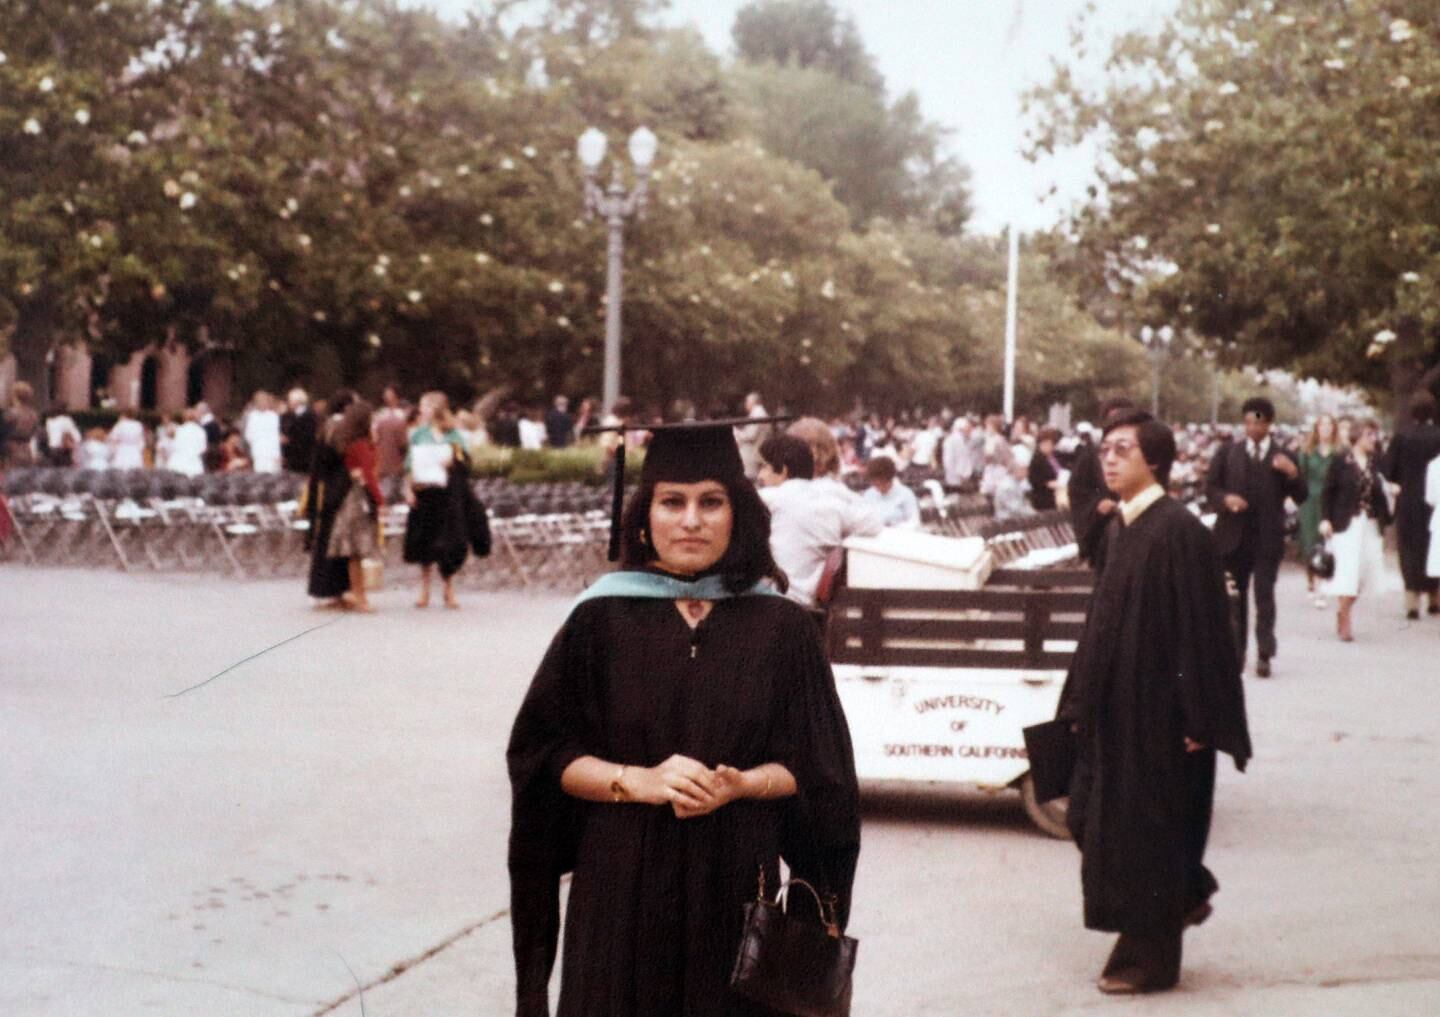 Dr Nora Al Midfa at a graduation ceremony after earning her PhD from the University of Southern California in 1984. Photo: Dr Nora Al Midfa